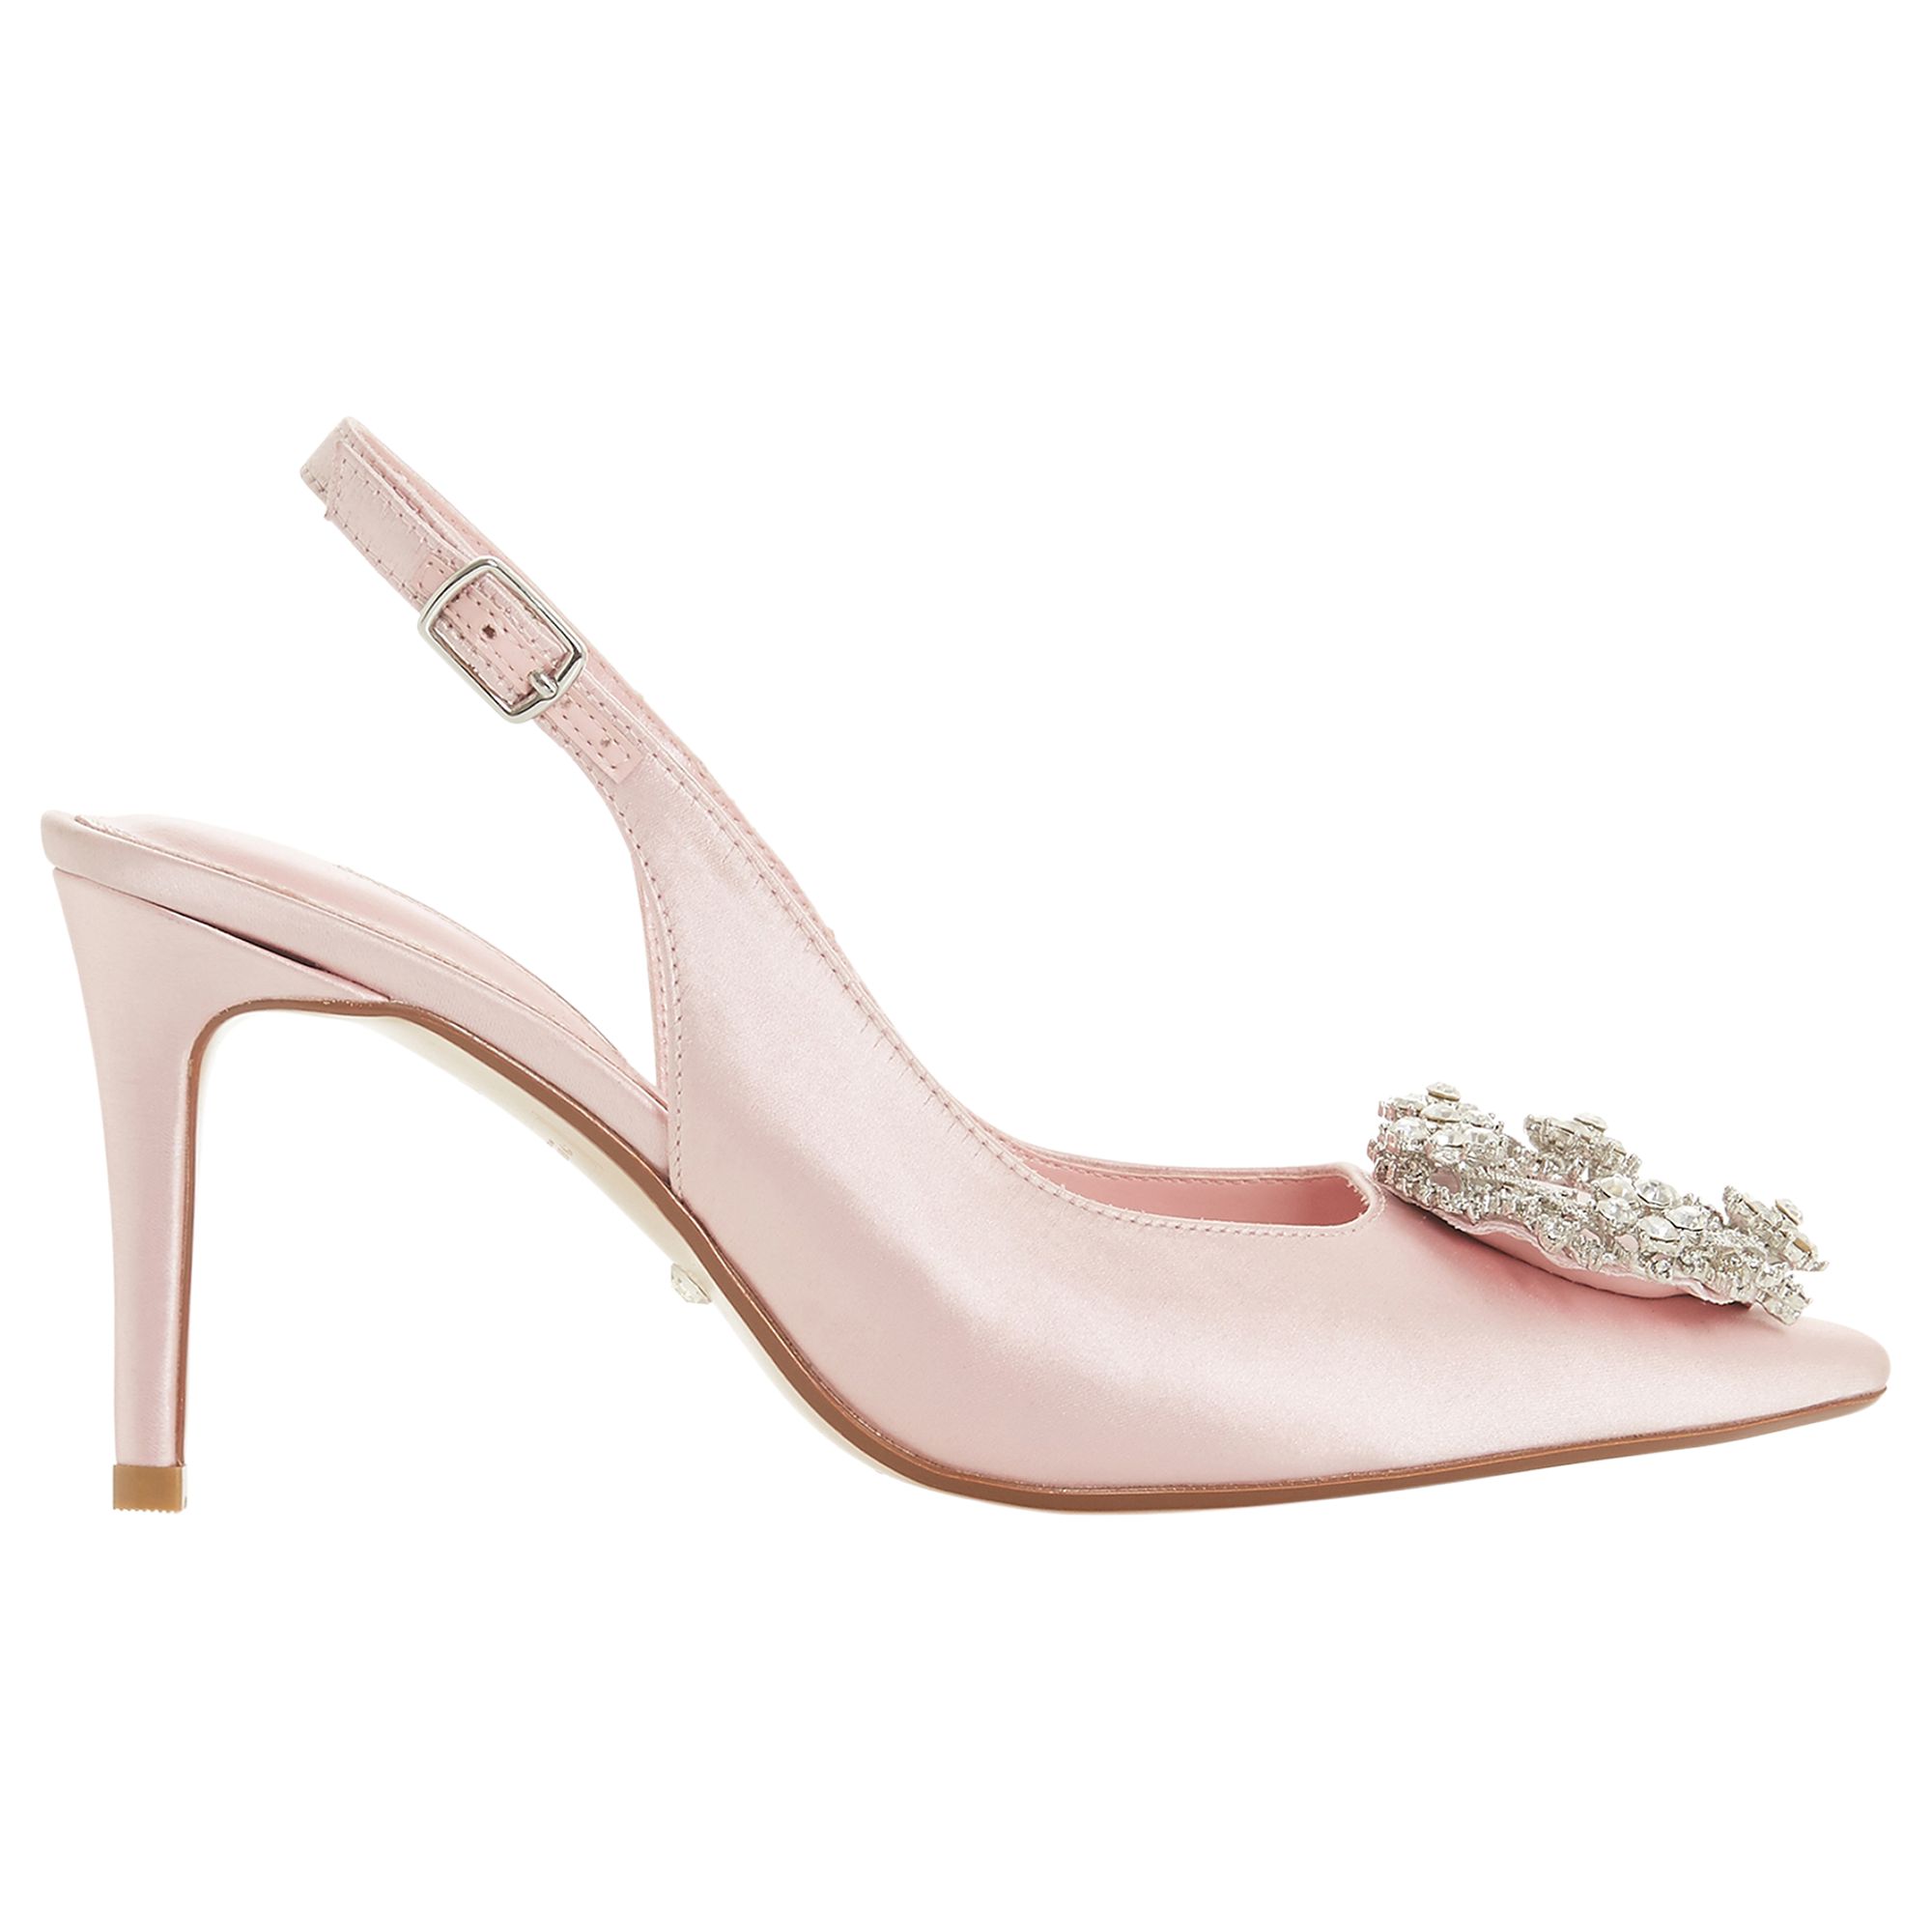 Dune Bridal Collection Ceremony Wreath Brooch Slingback Court Shoes at John Lewis & Partners